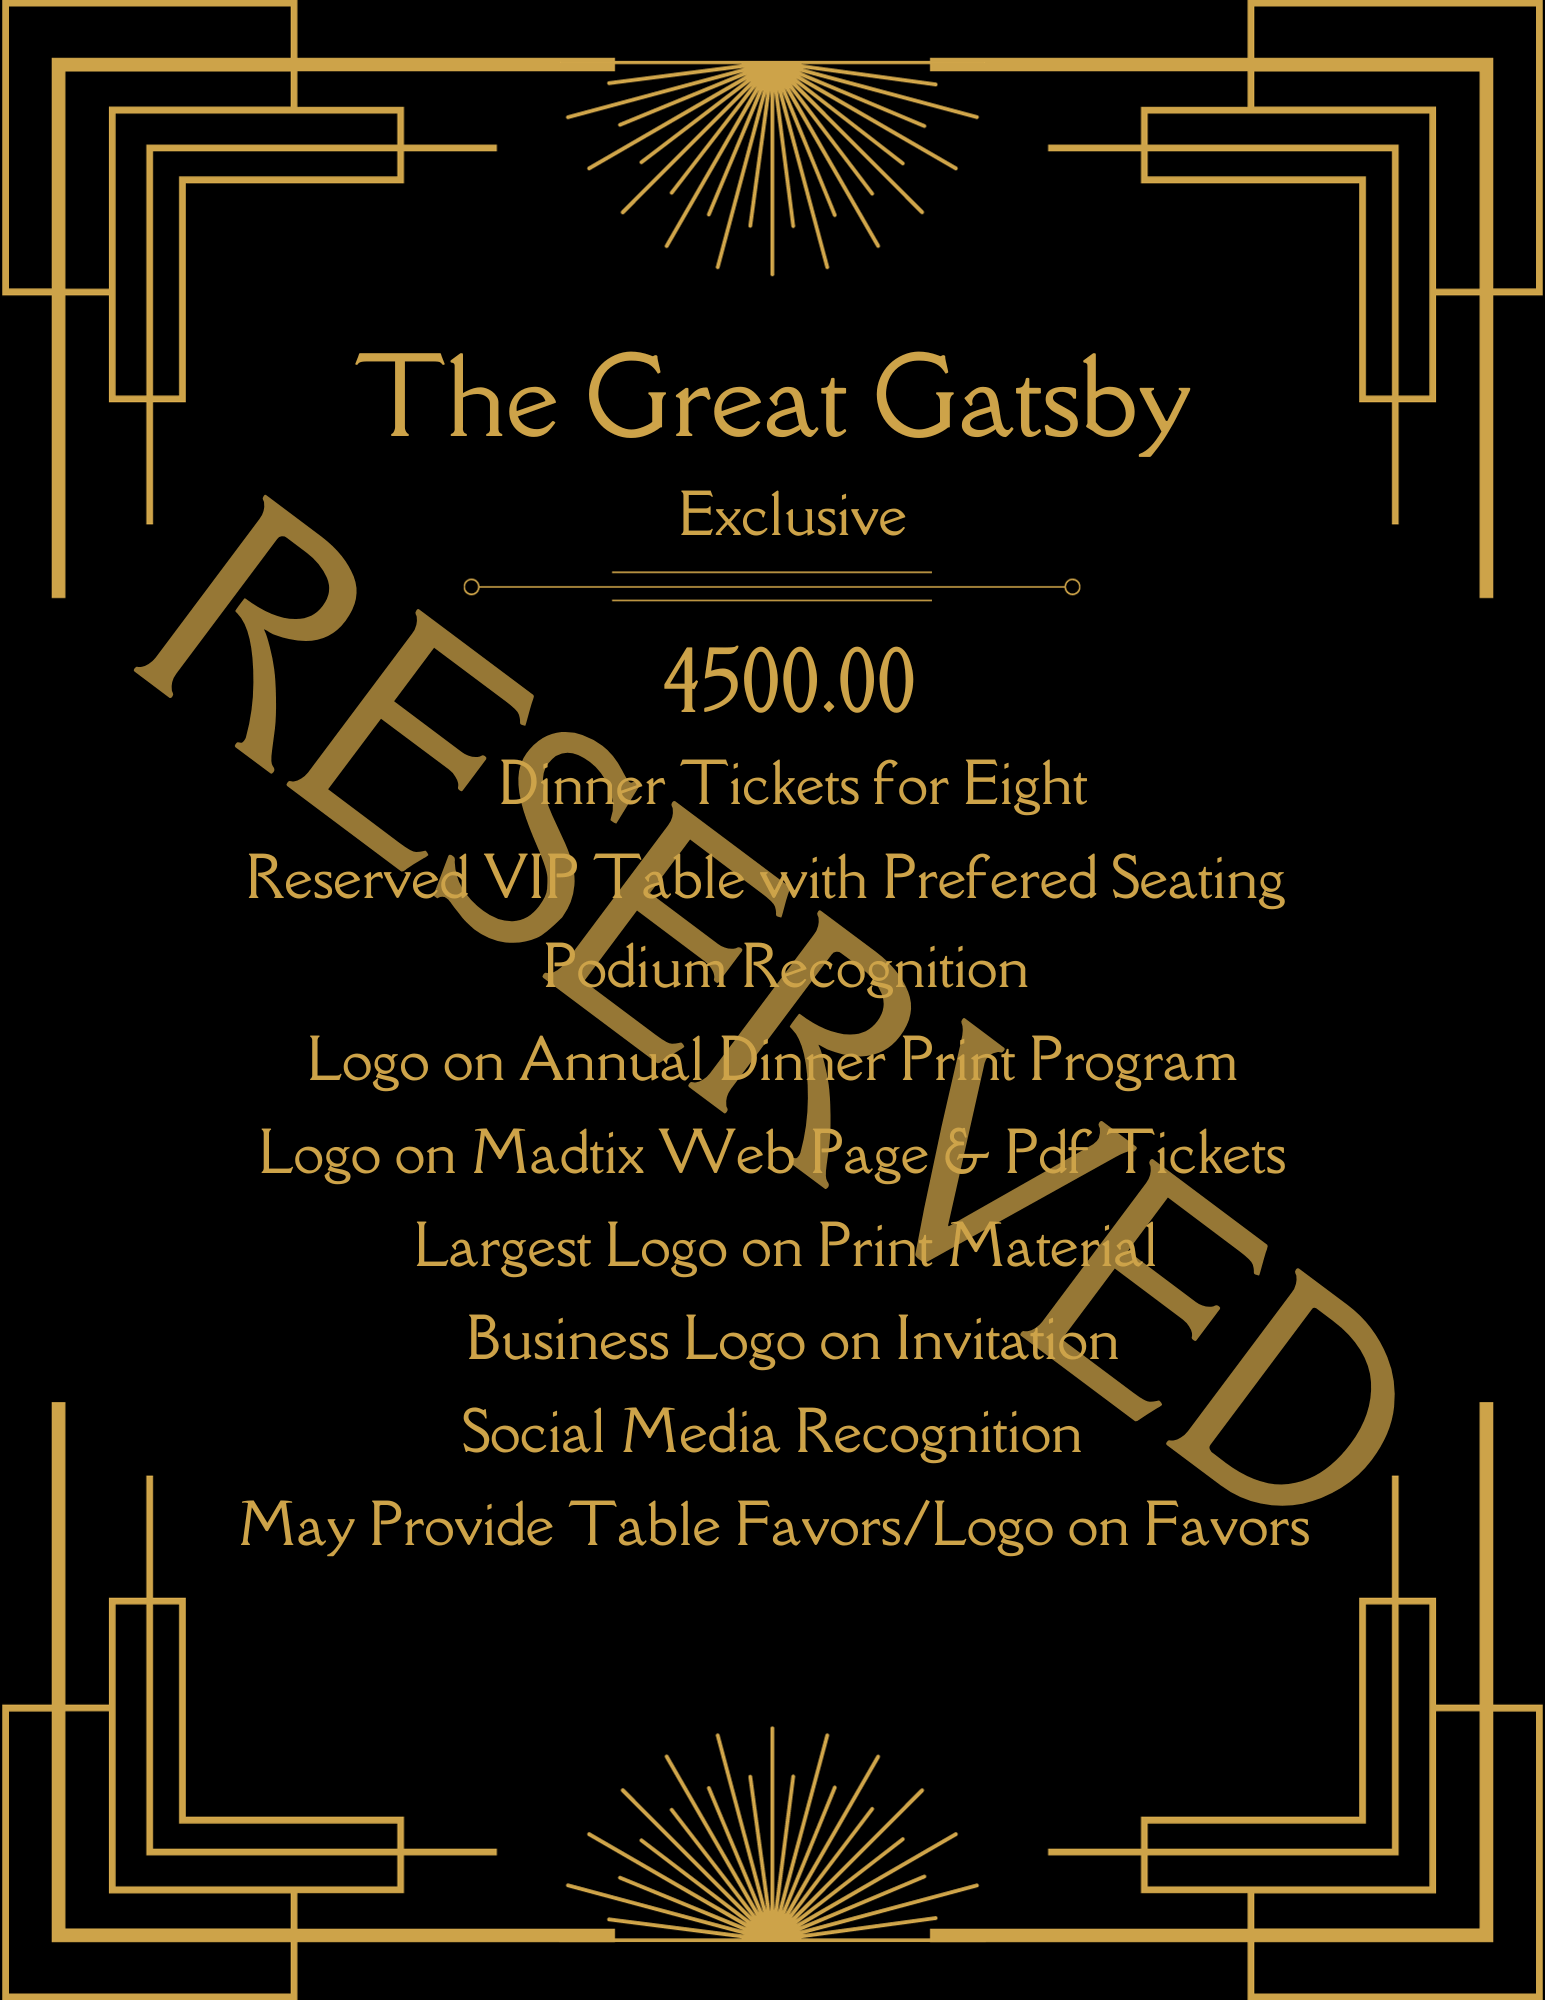 the great gatsby exclusive sponsor